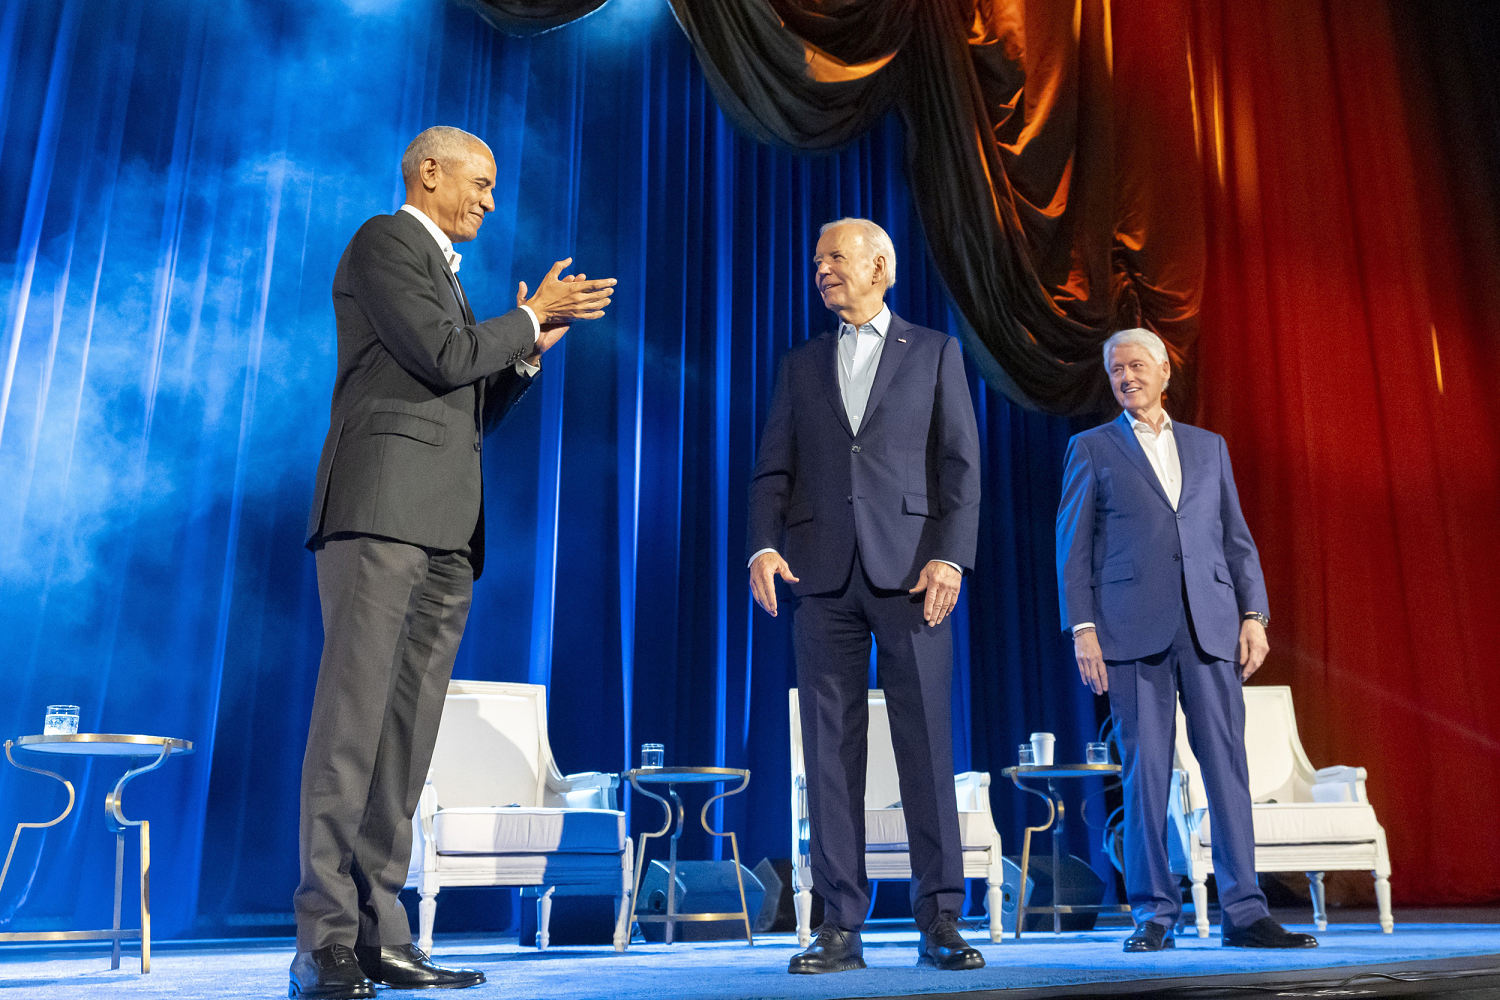 3 presidents, celebrity performances and protester interruptions at Biden's $25M fundraiser